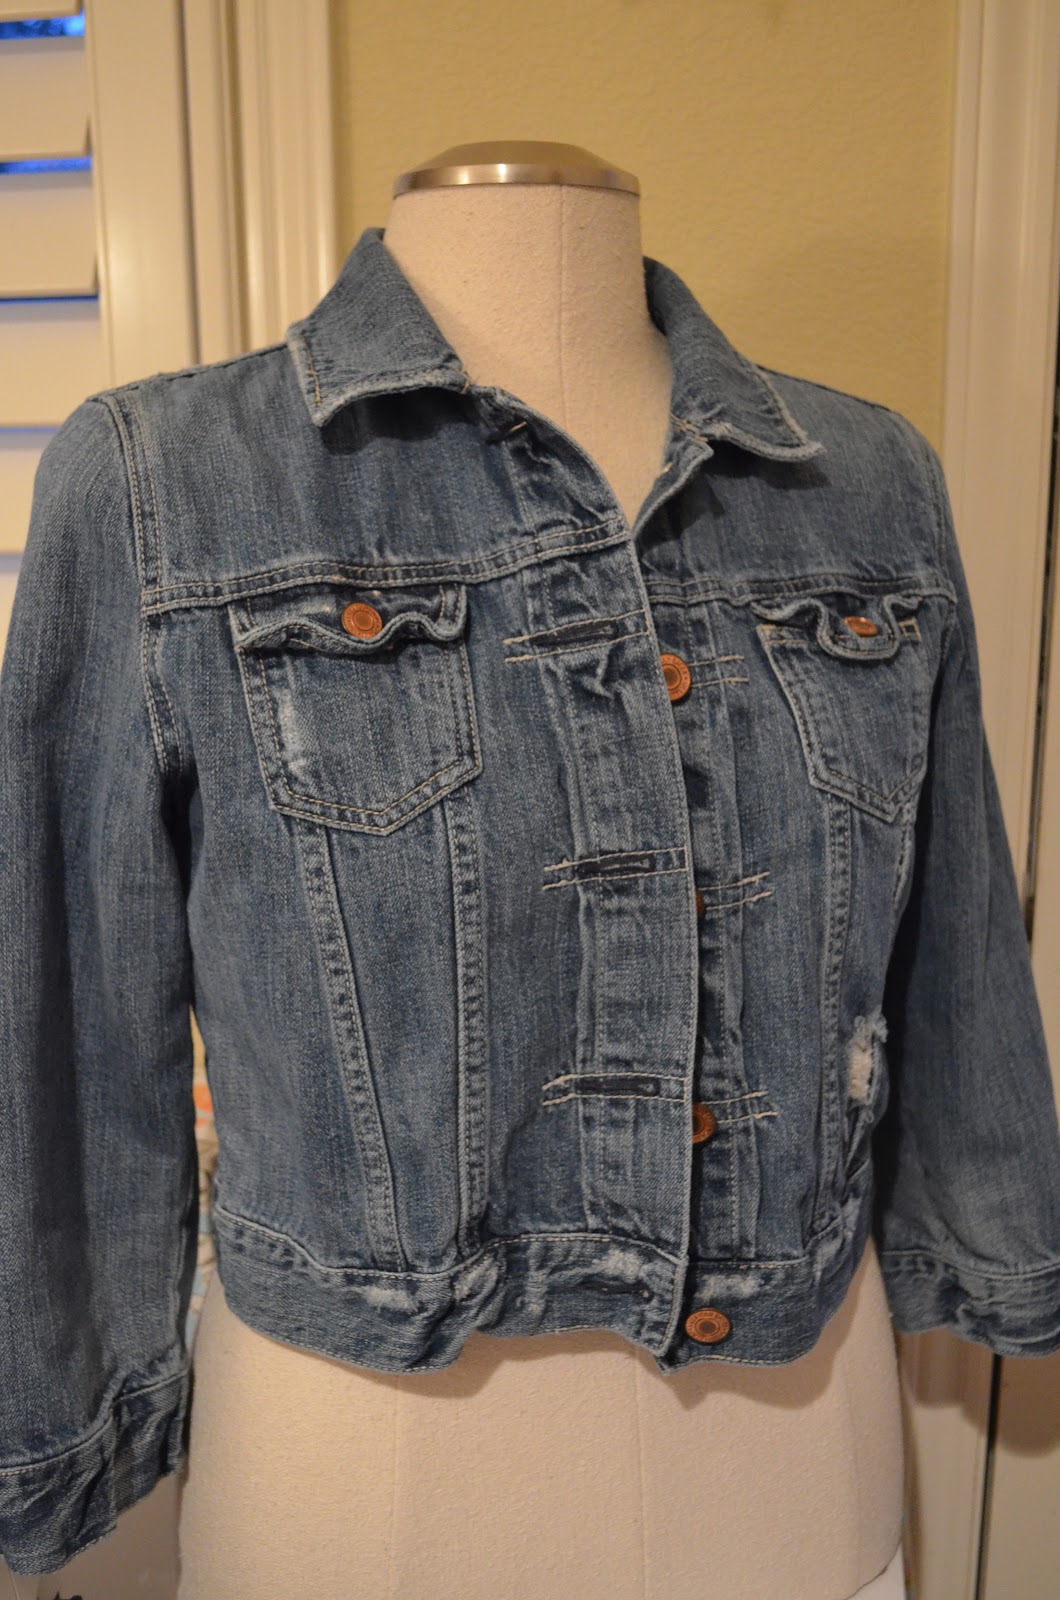 Therapy. Everyone needs some.: DIY Studded Denim Jacket